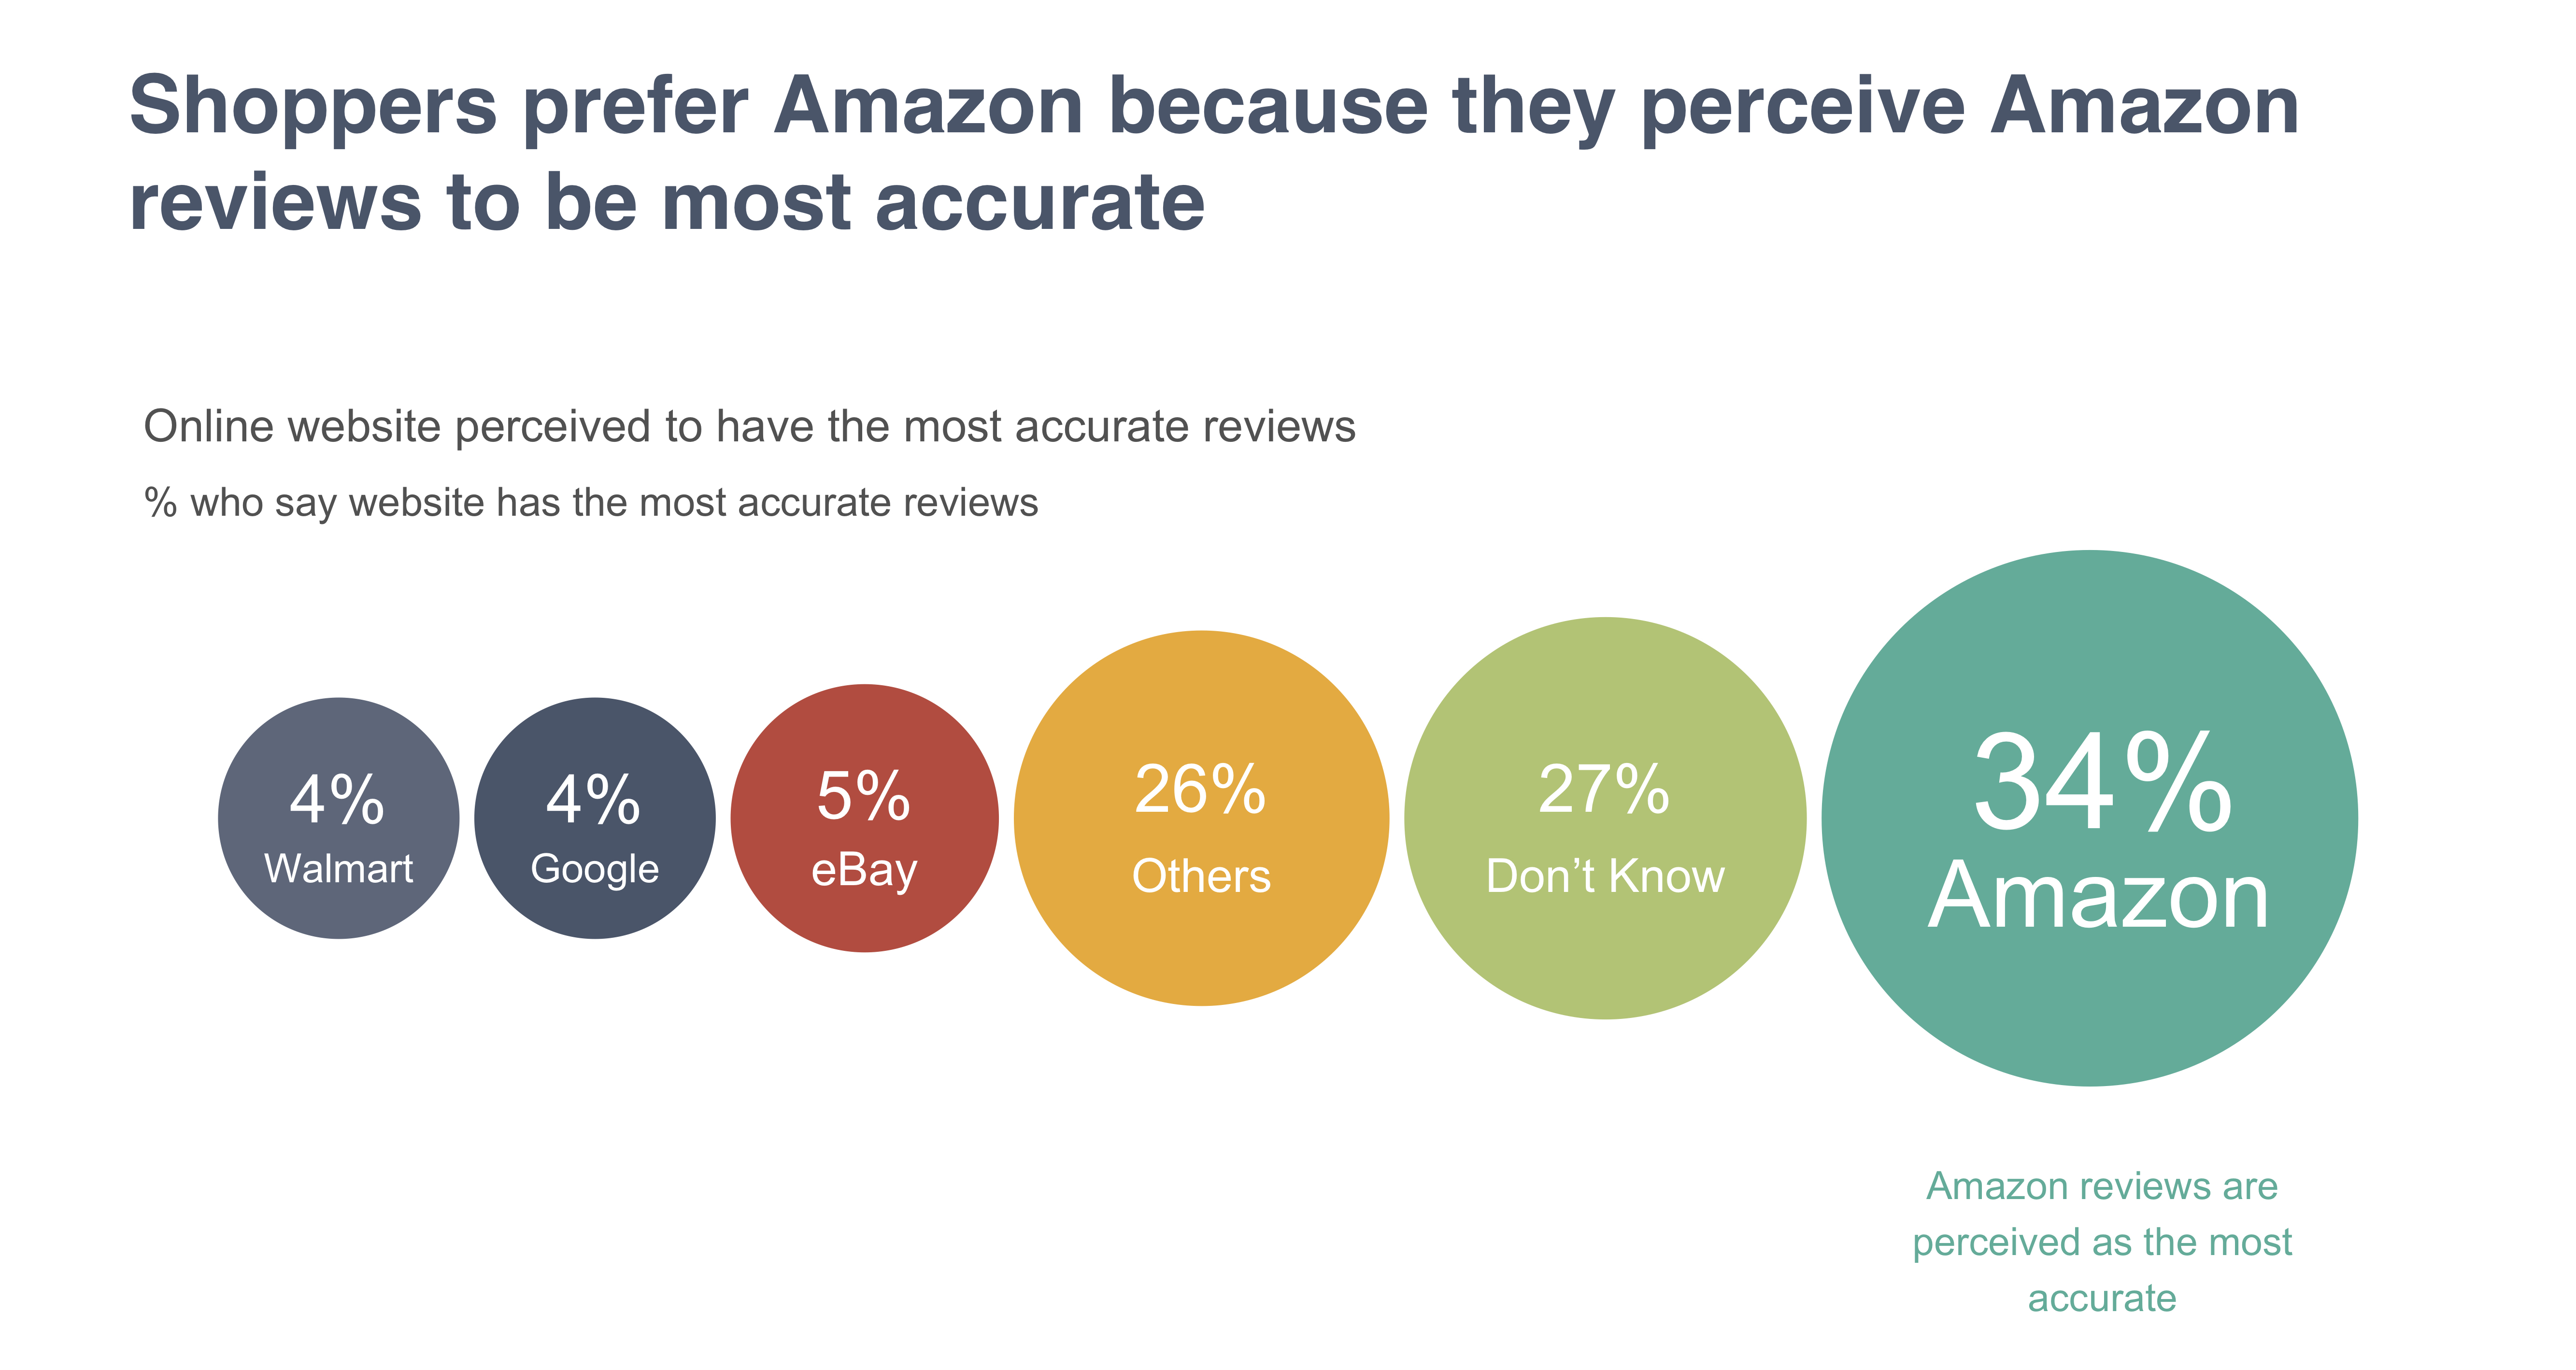 Why Amazon is top destination for shoppers to read online reviews